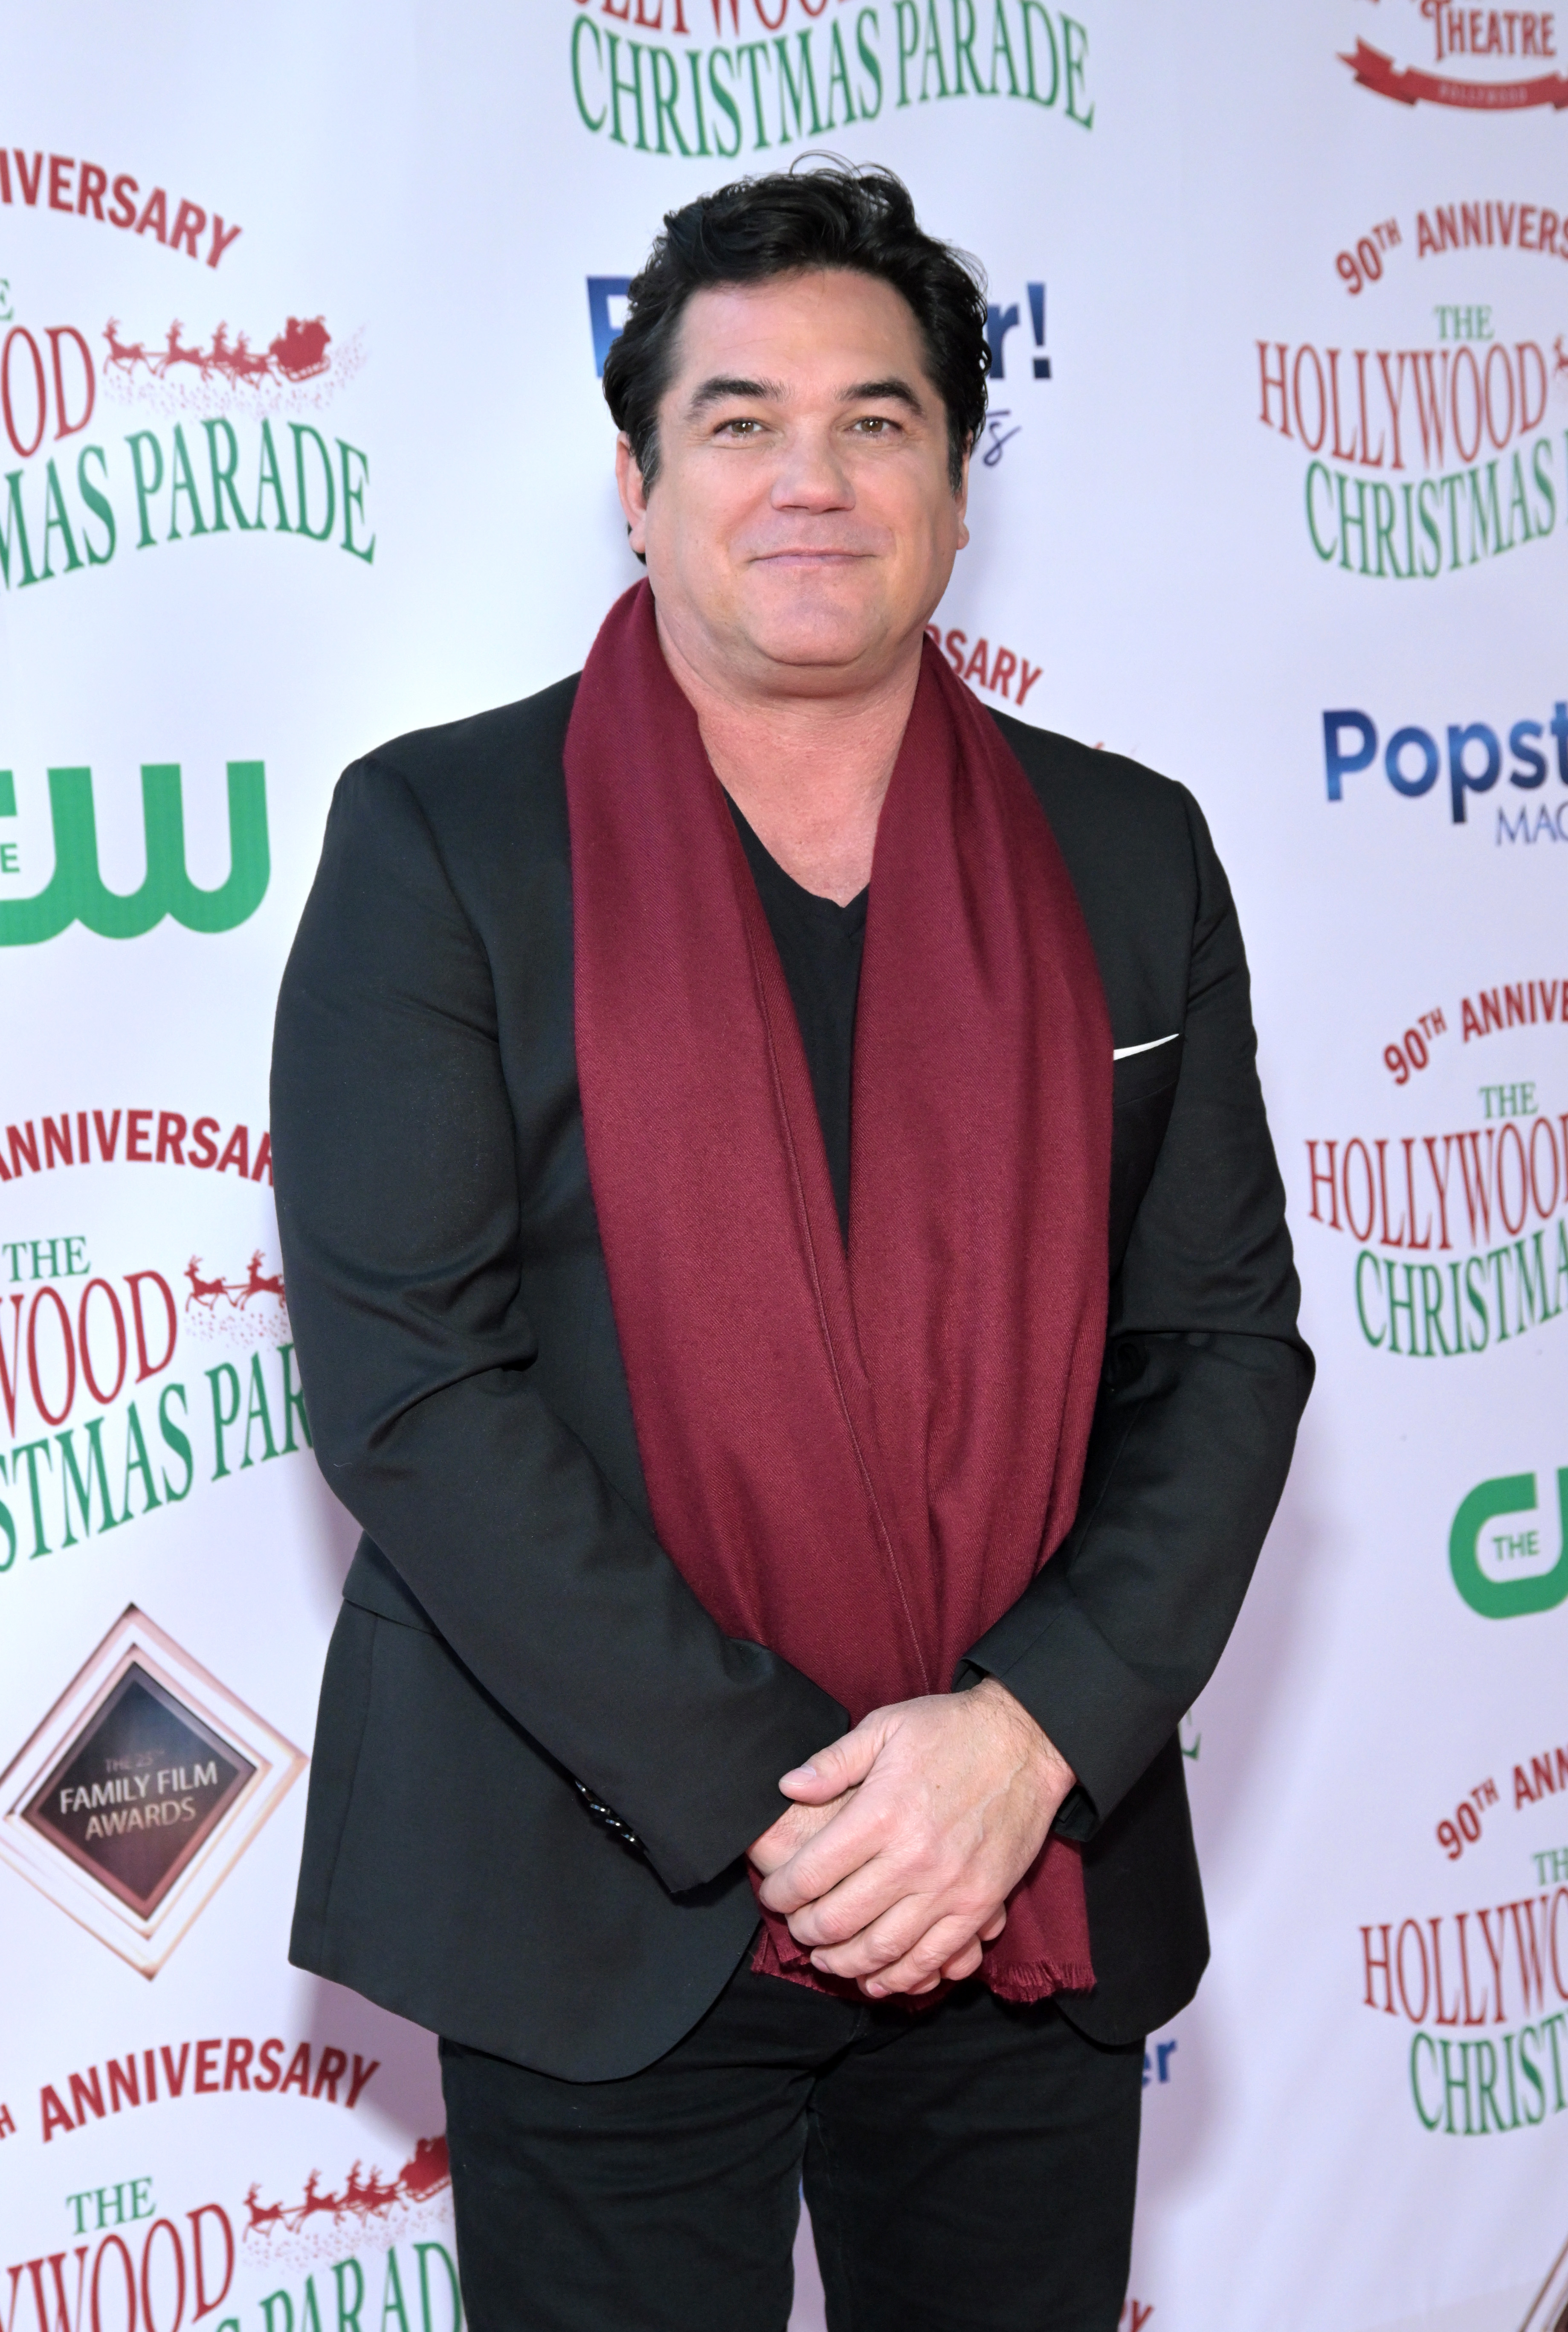 Dean Cain at the 90th anniversary of the Hollywood Christmas Parade in California on November 27, 2022 | Source: Getty Images